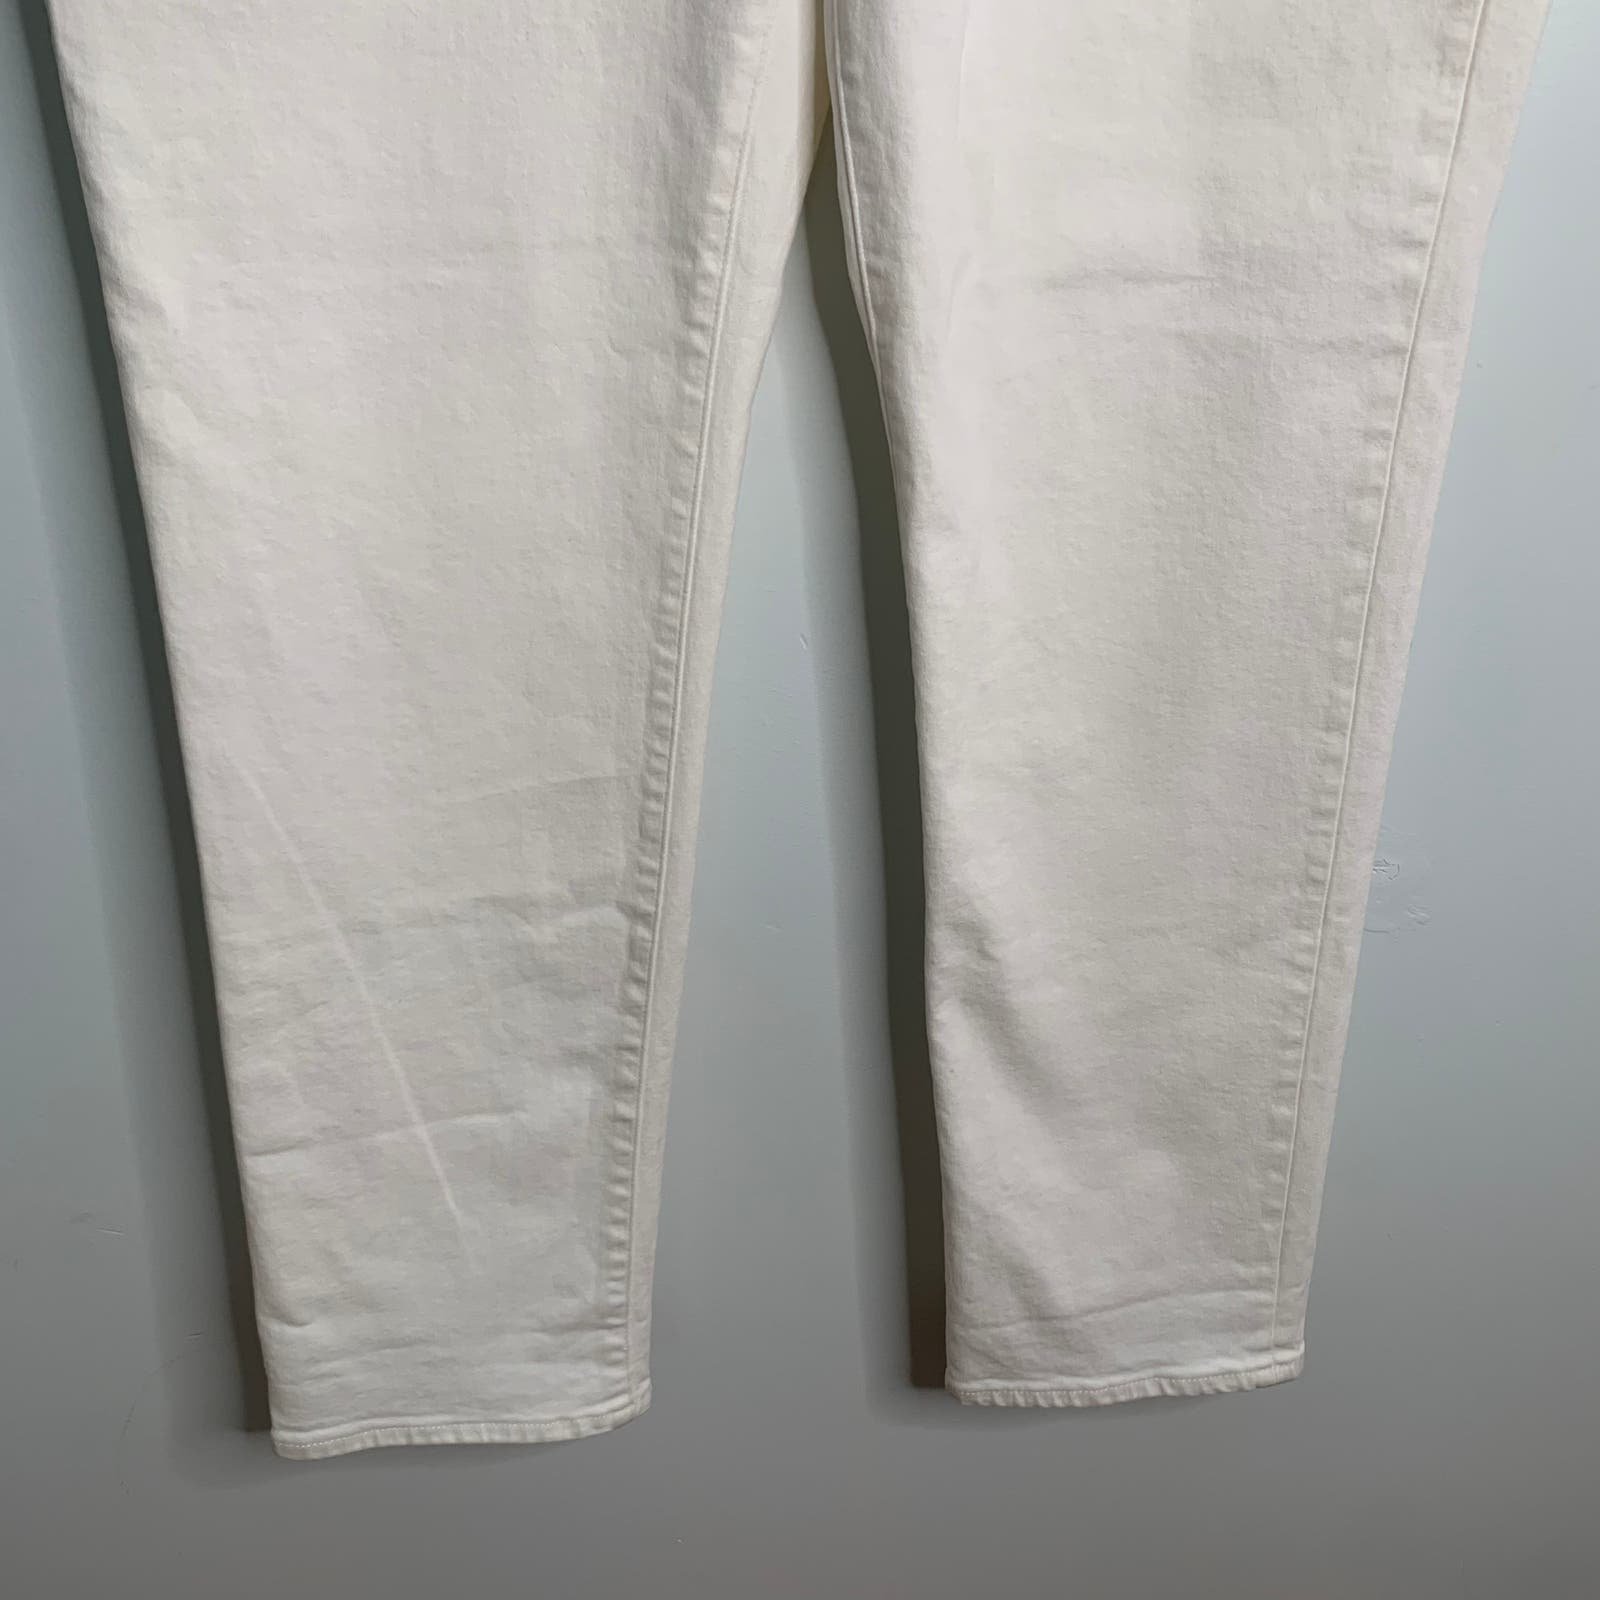 Custom Madewell The High-Rise Slim Boyjean Heritage Stretch Denim Tile White Size 32T Md9WgQpo9 all for you